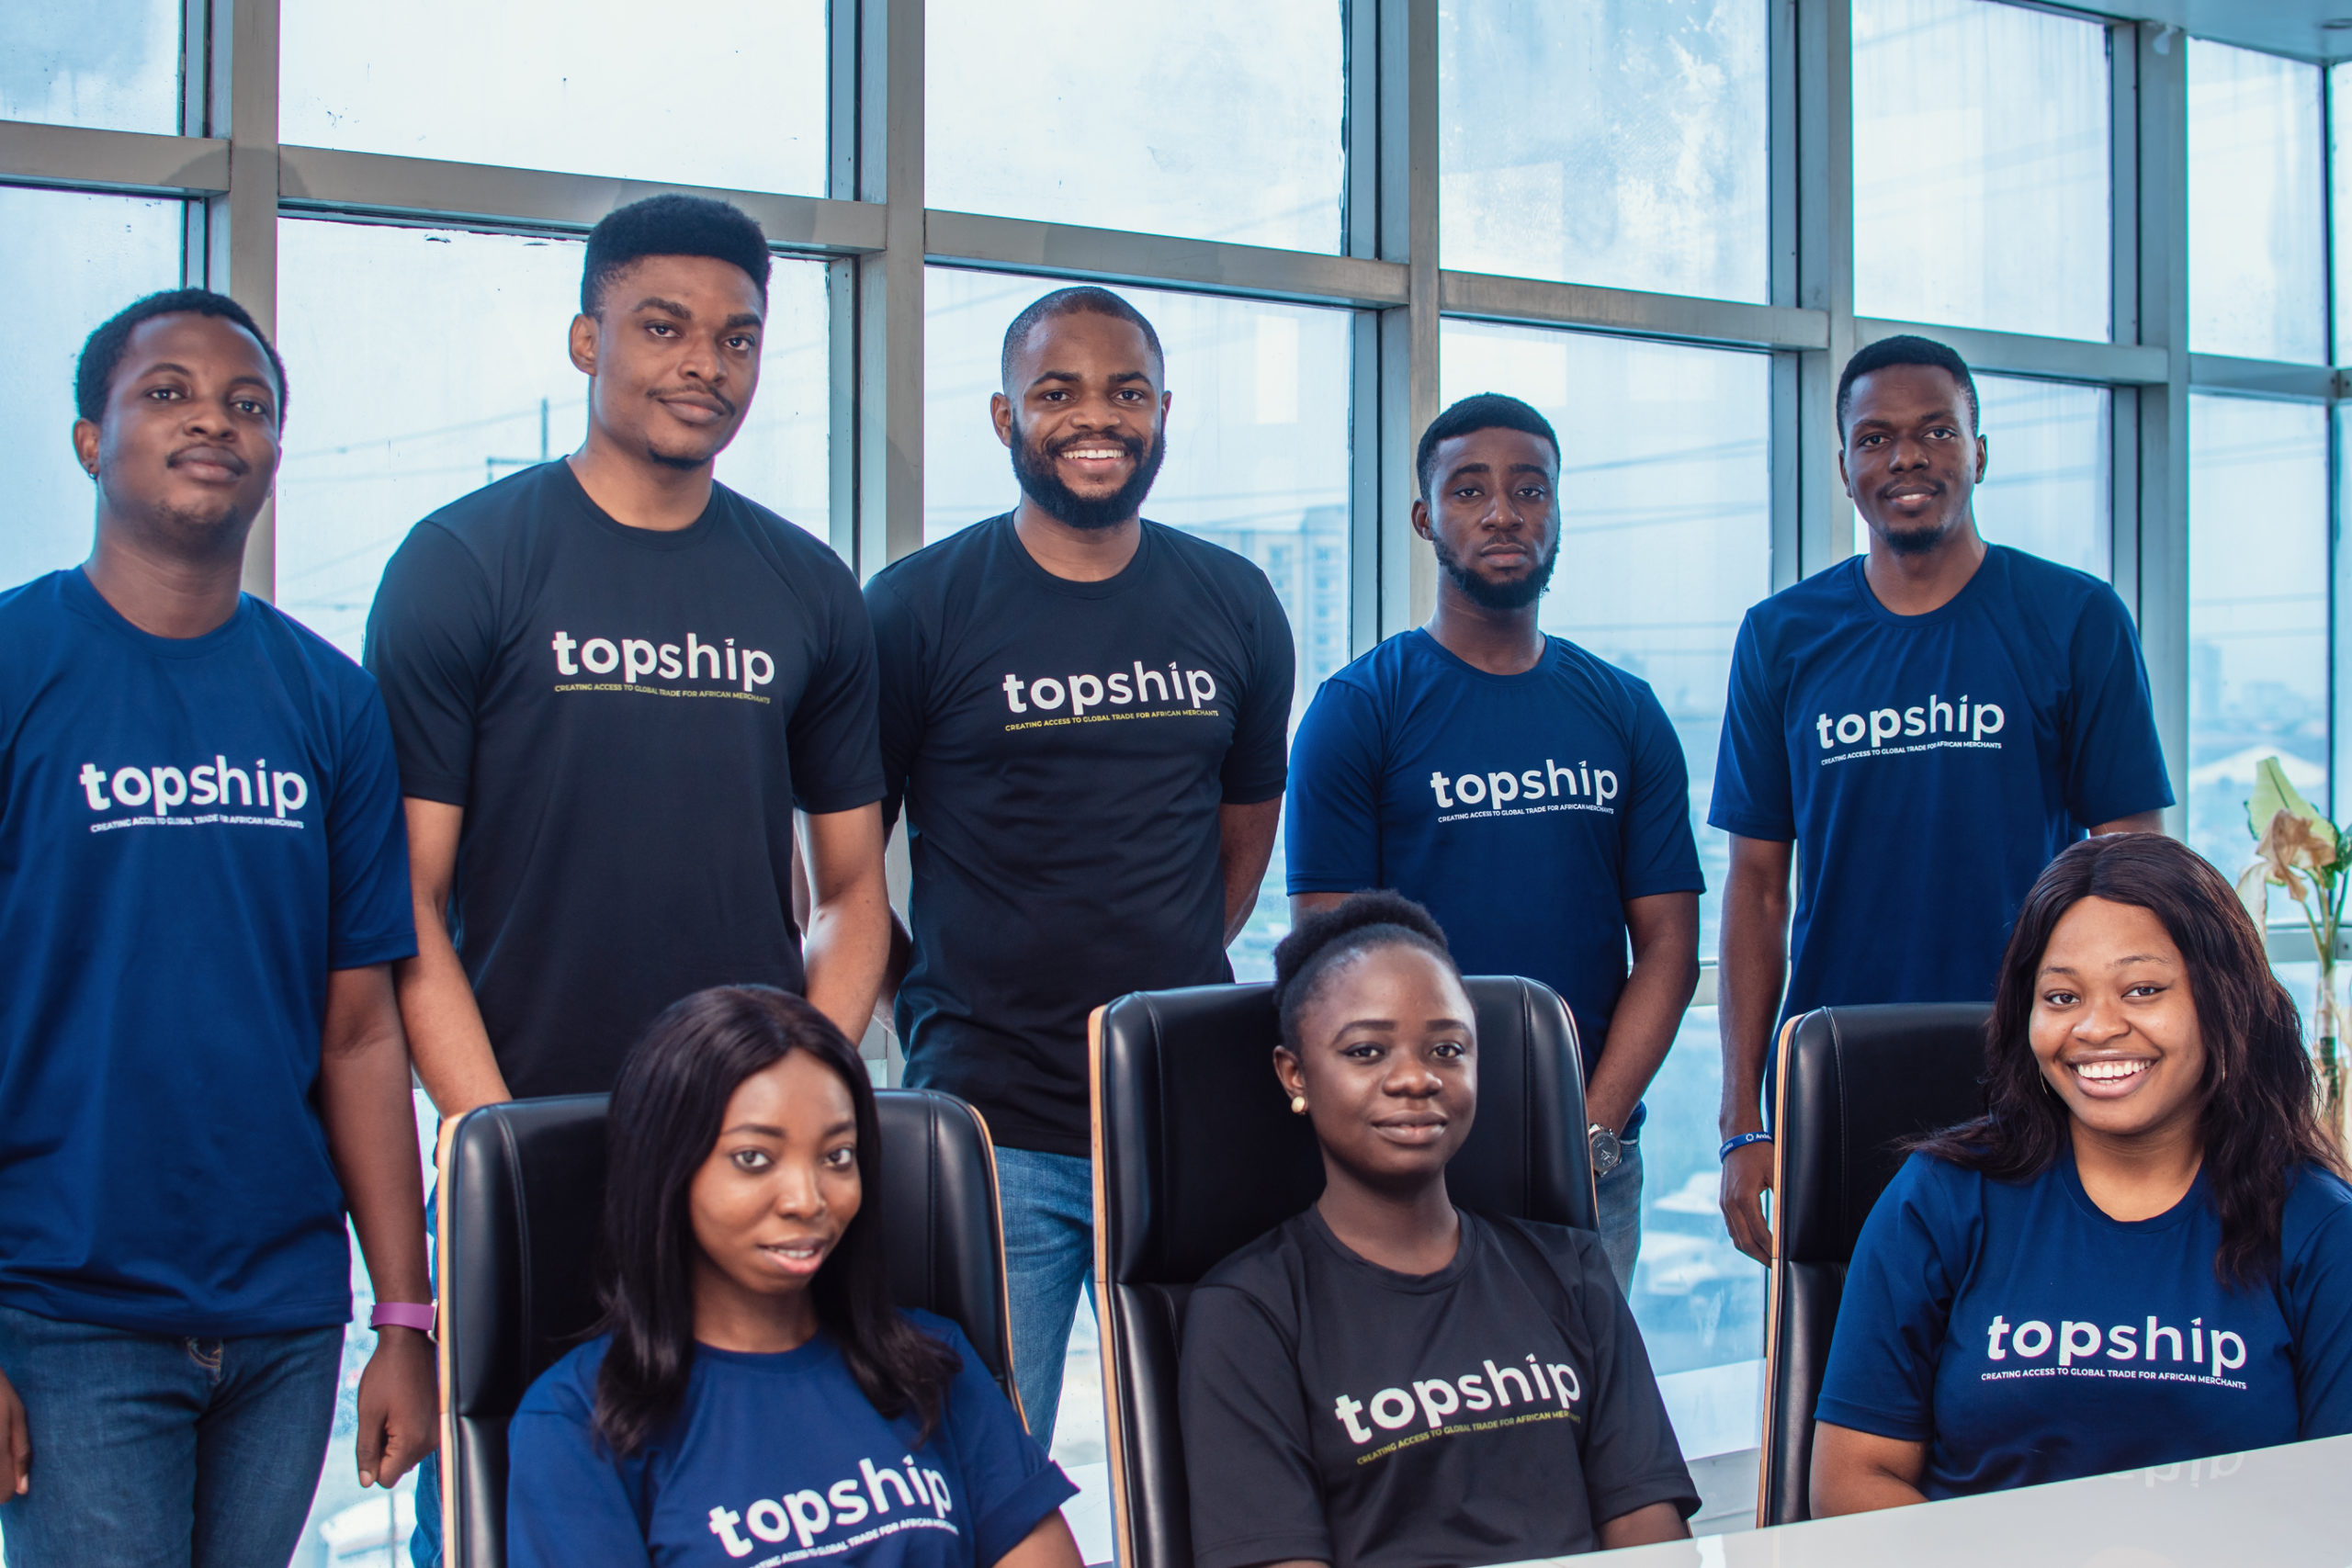 Topship goes from being an Instagram business to a Y Combinator company